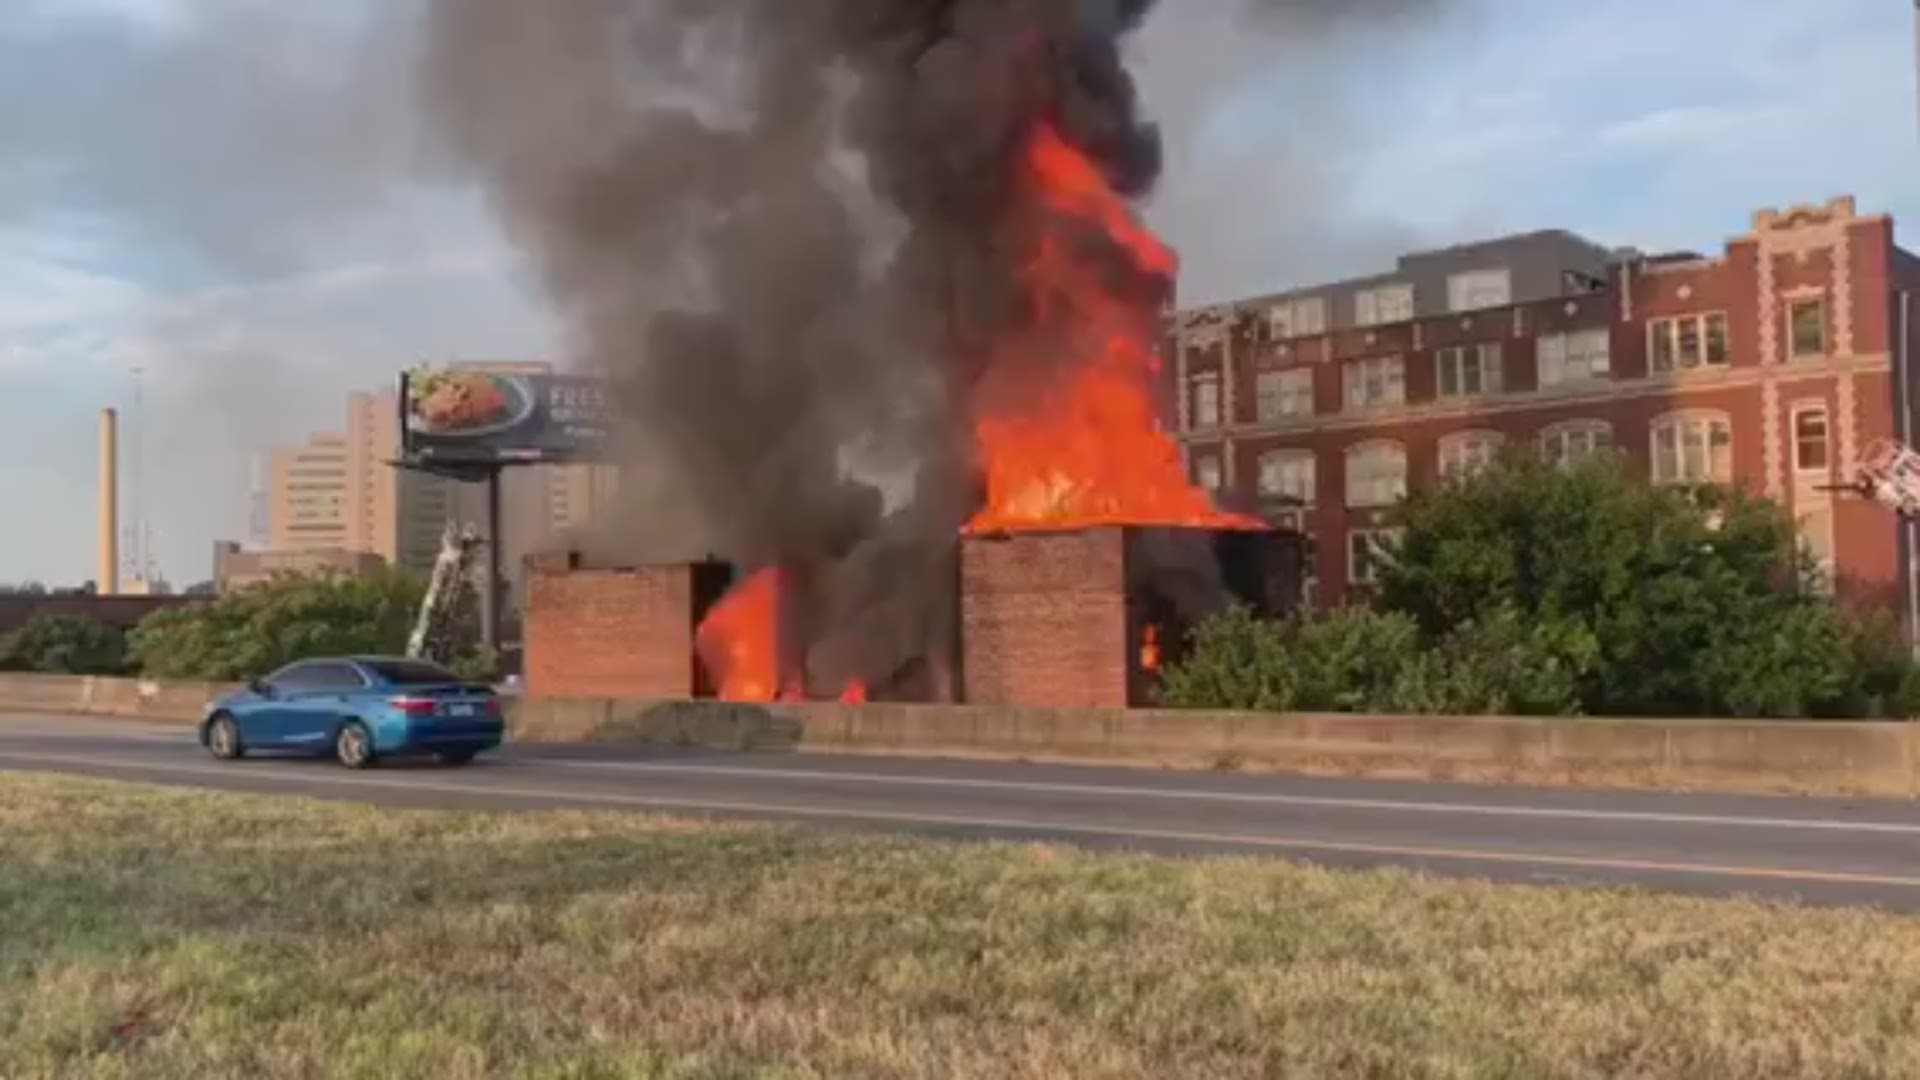 Atlanta firefighters battled a two-alarm building fire on Auburn Avenue near the Downtown Connector on Sunday, Sept. 15. There was no immediate word on injuries.